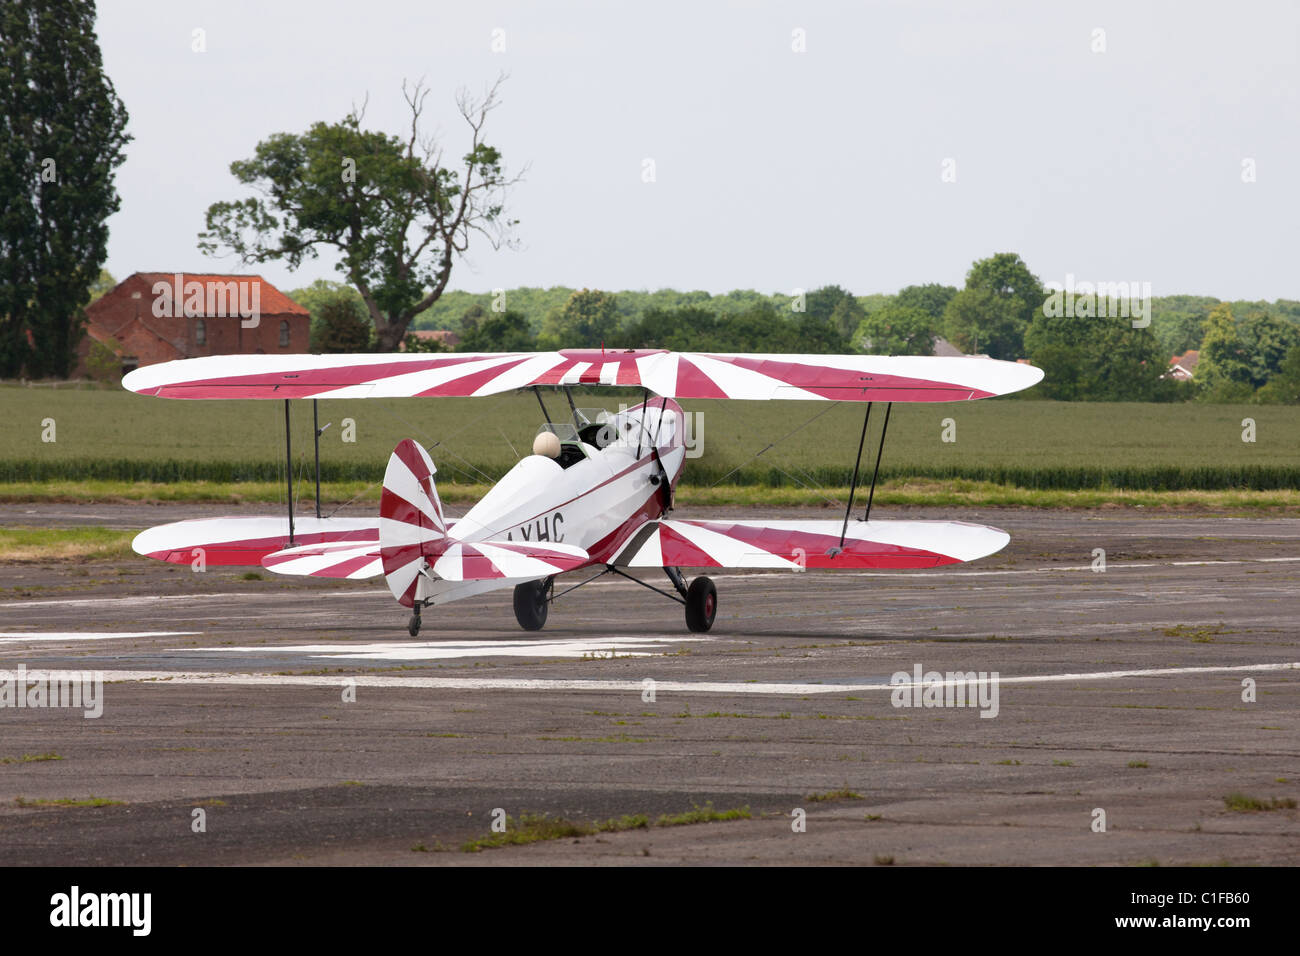 Stampe SV4C G-AXHC taking-ff from runway at Wickenby Airfield Stock Photo